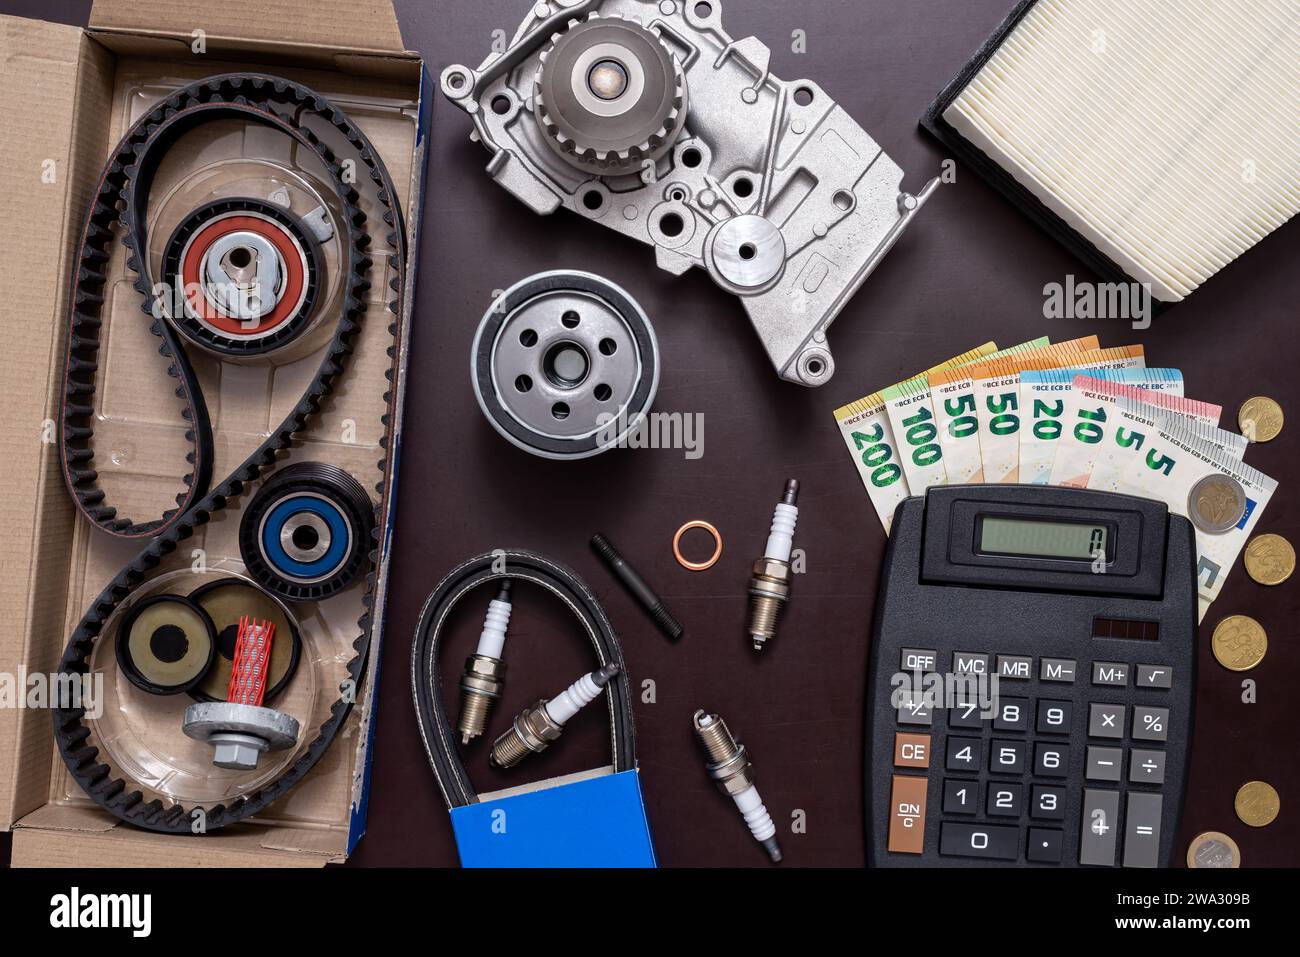 Spare parts for car repair, calculator and money on the working table. Stock Photo